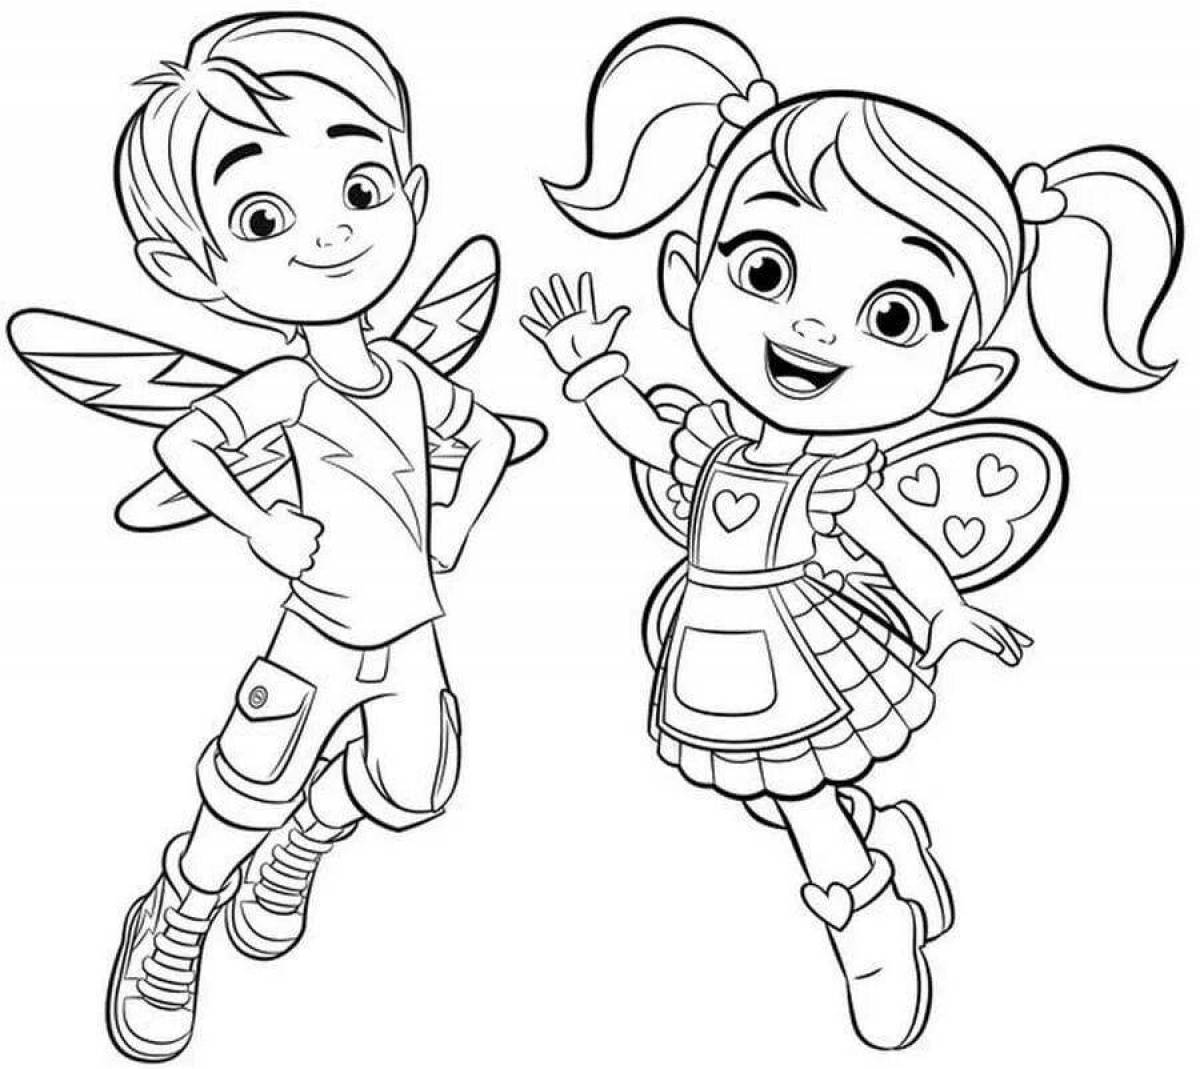 Fairy magic coloring pages